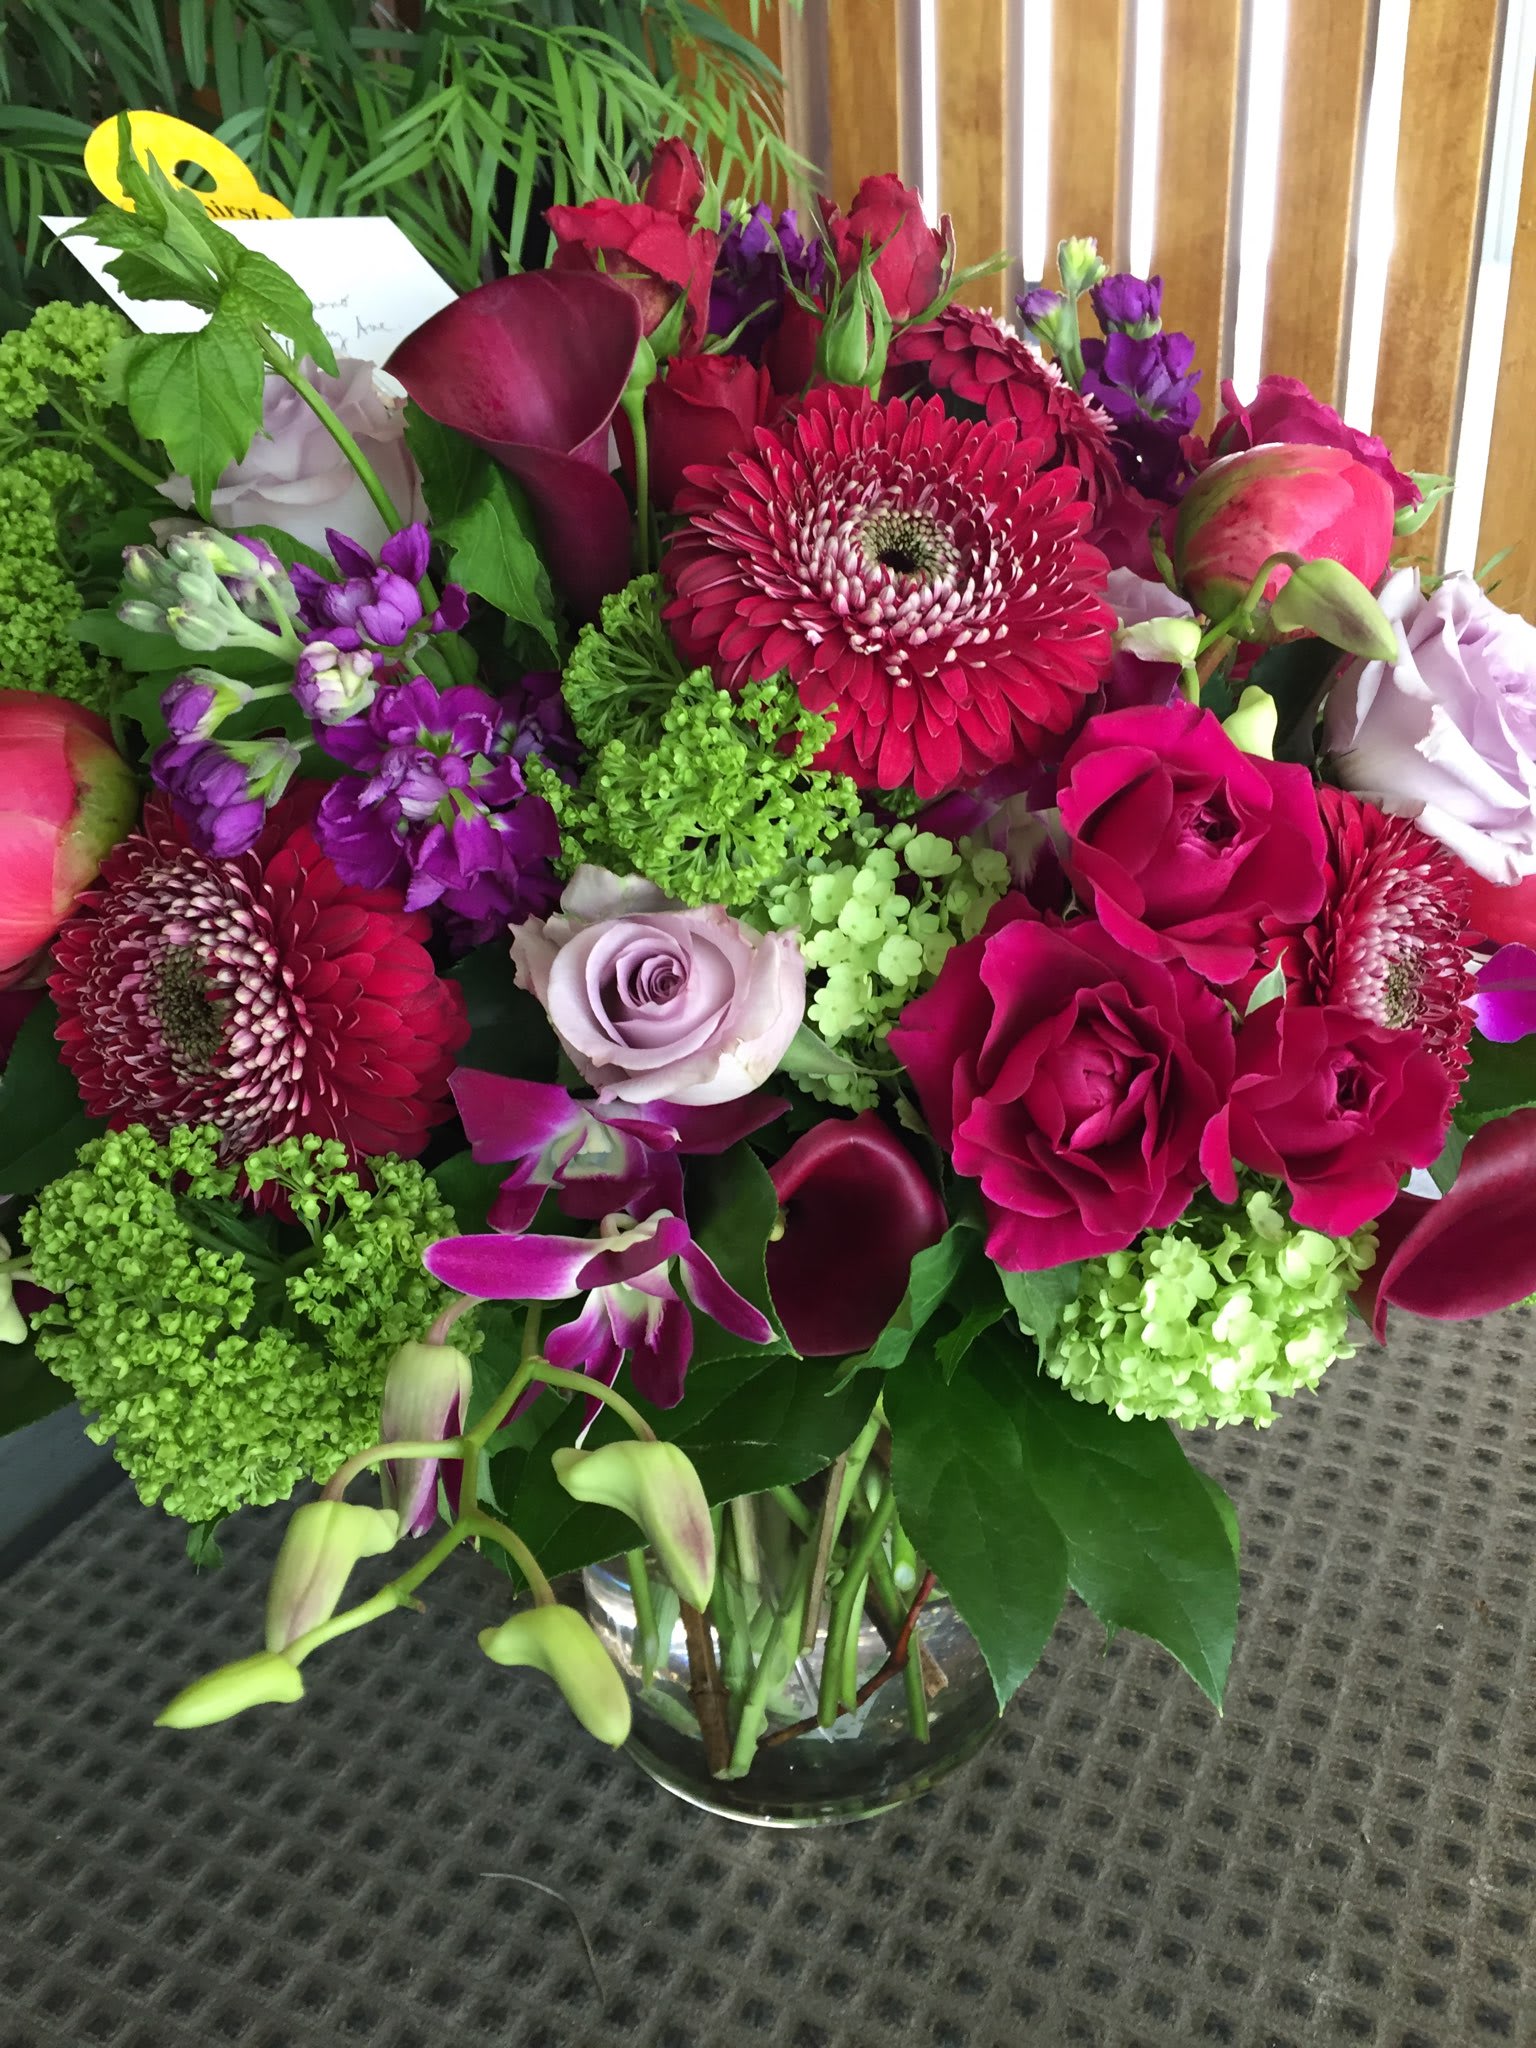 Gemstone Bouquet - Ruby reds, amethyst purples and peridot greens make us this opulent and lush bouquet. Individual varieties may vary according to season and availability.